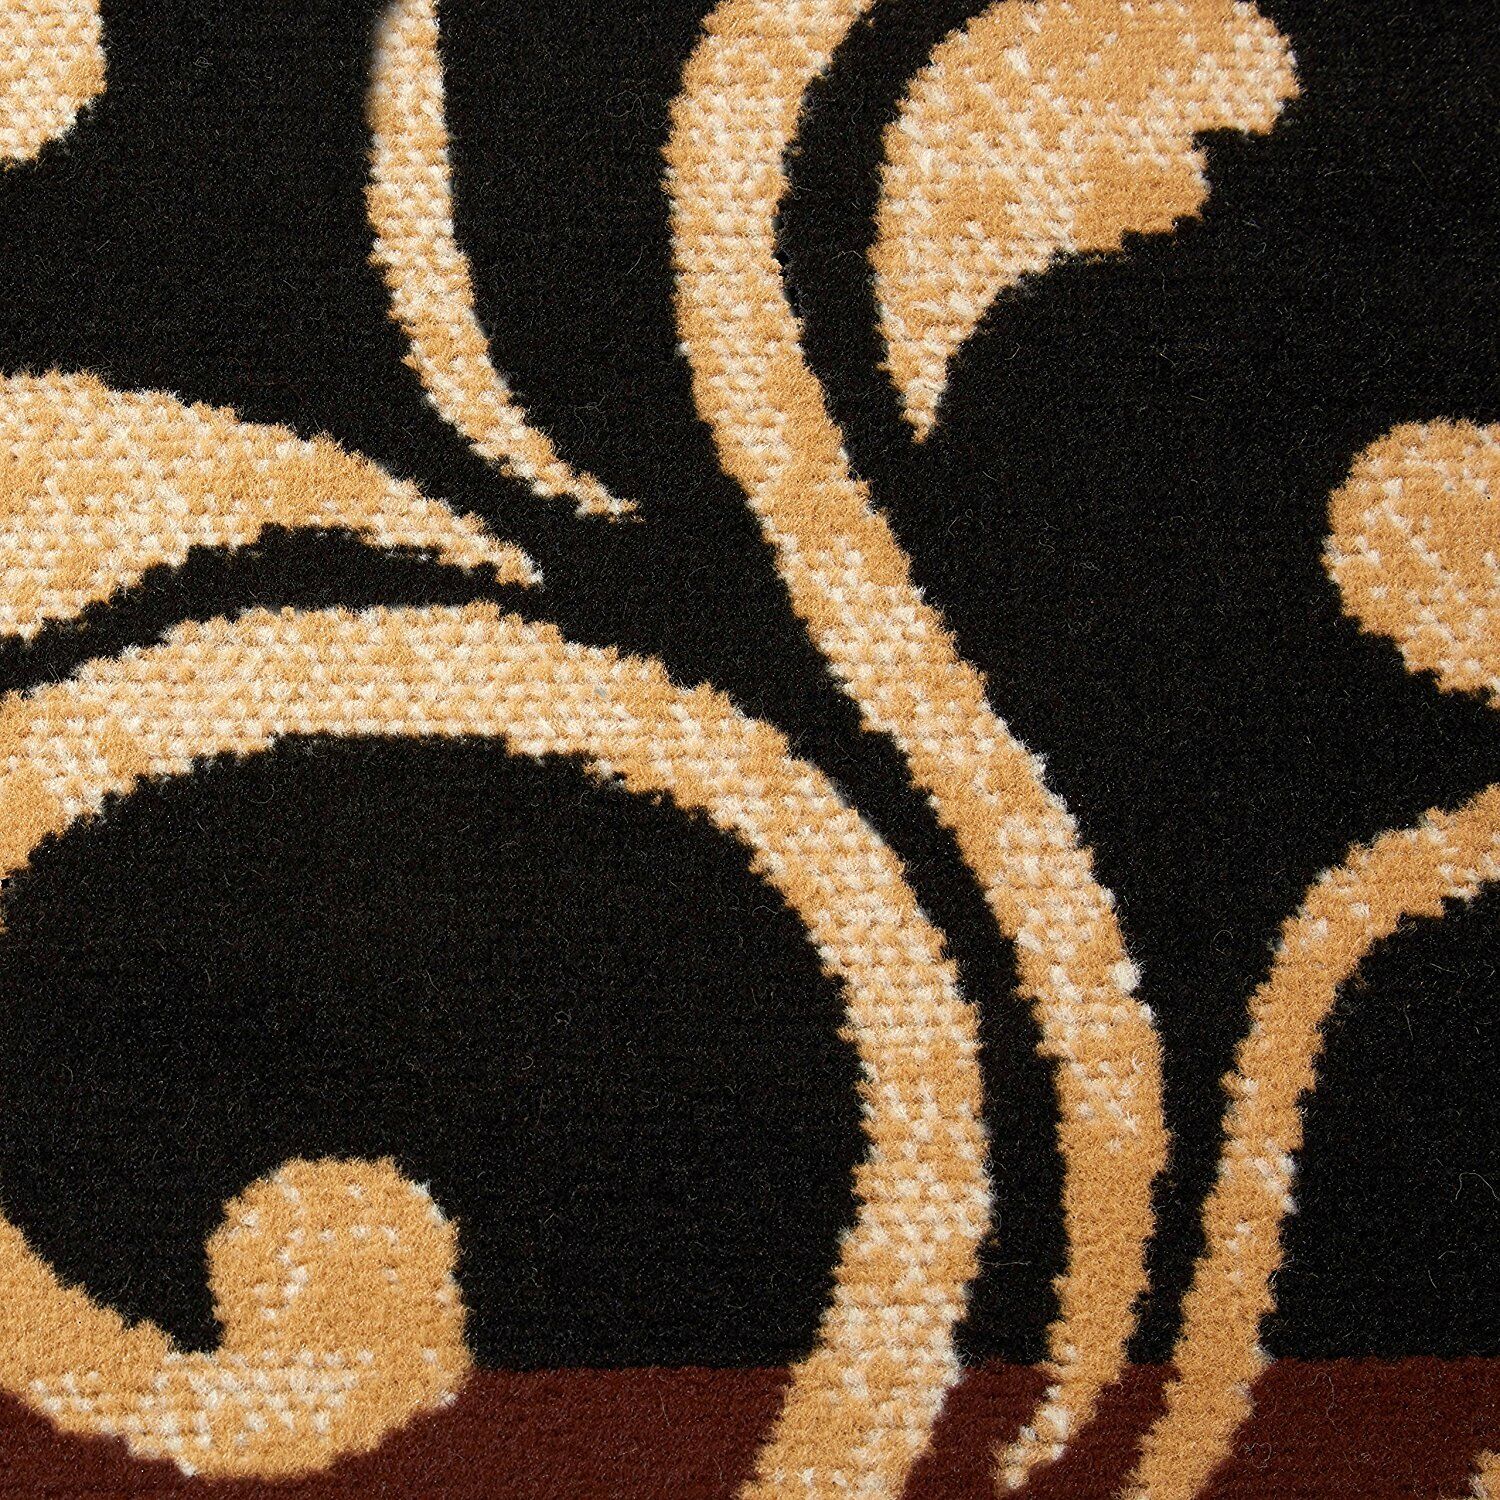 Black Brown Gold Scroll 3 pc Area Rug Set Accent Mat Carpet Runner 5 x 7 ft 2x3 Unknown Does Not Apply - фотография #2